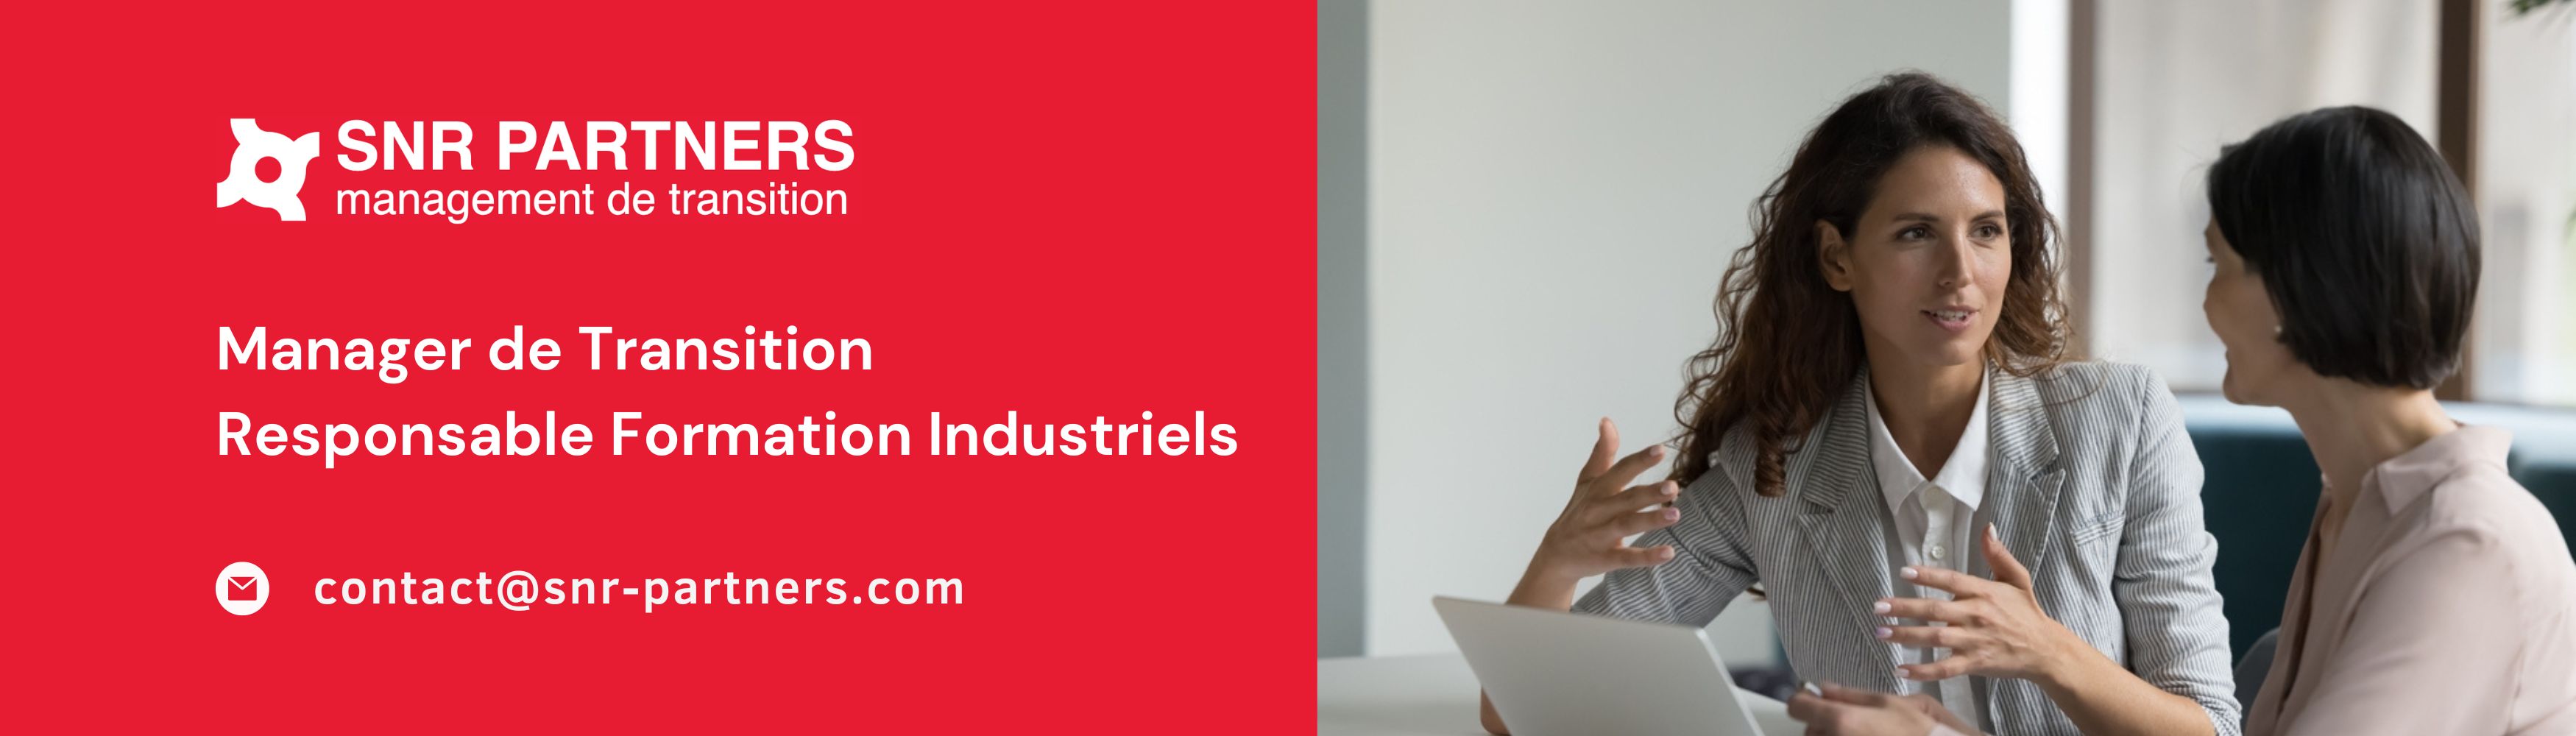 Responsable Formation Industriels